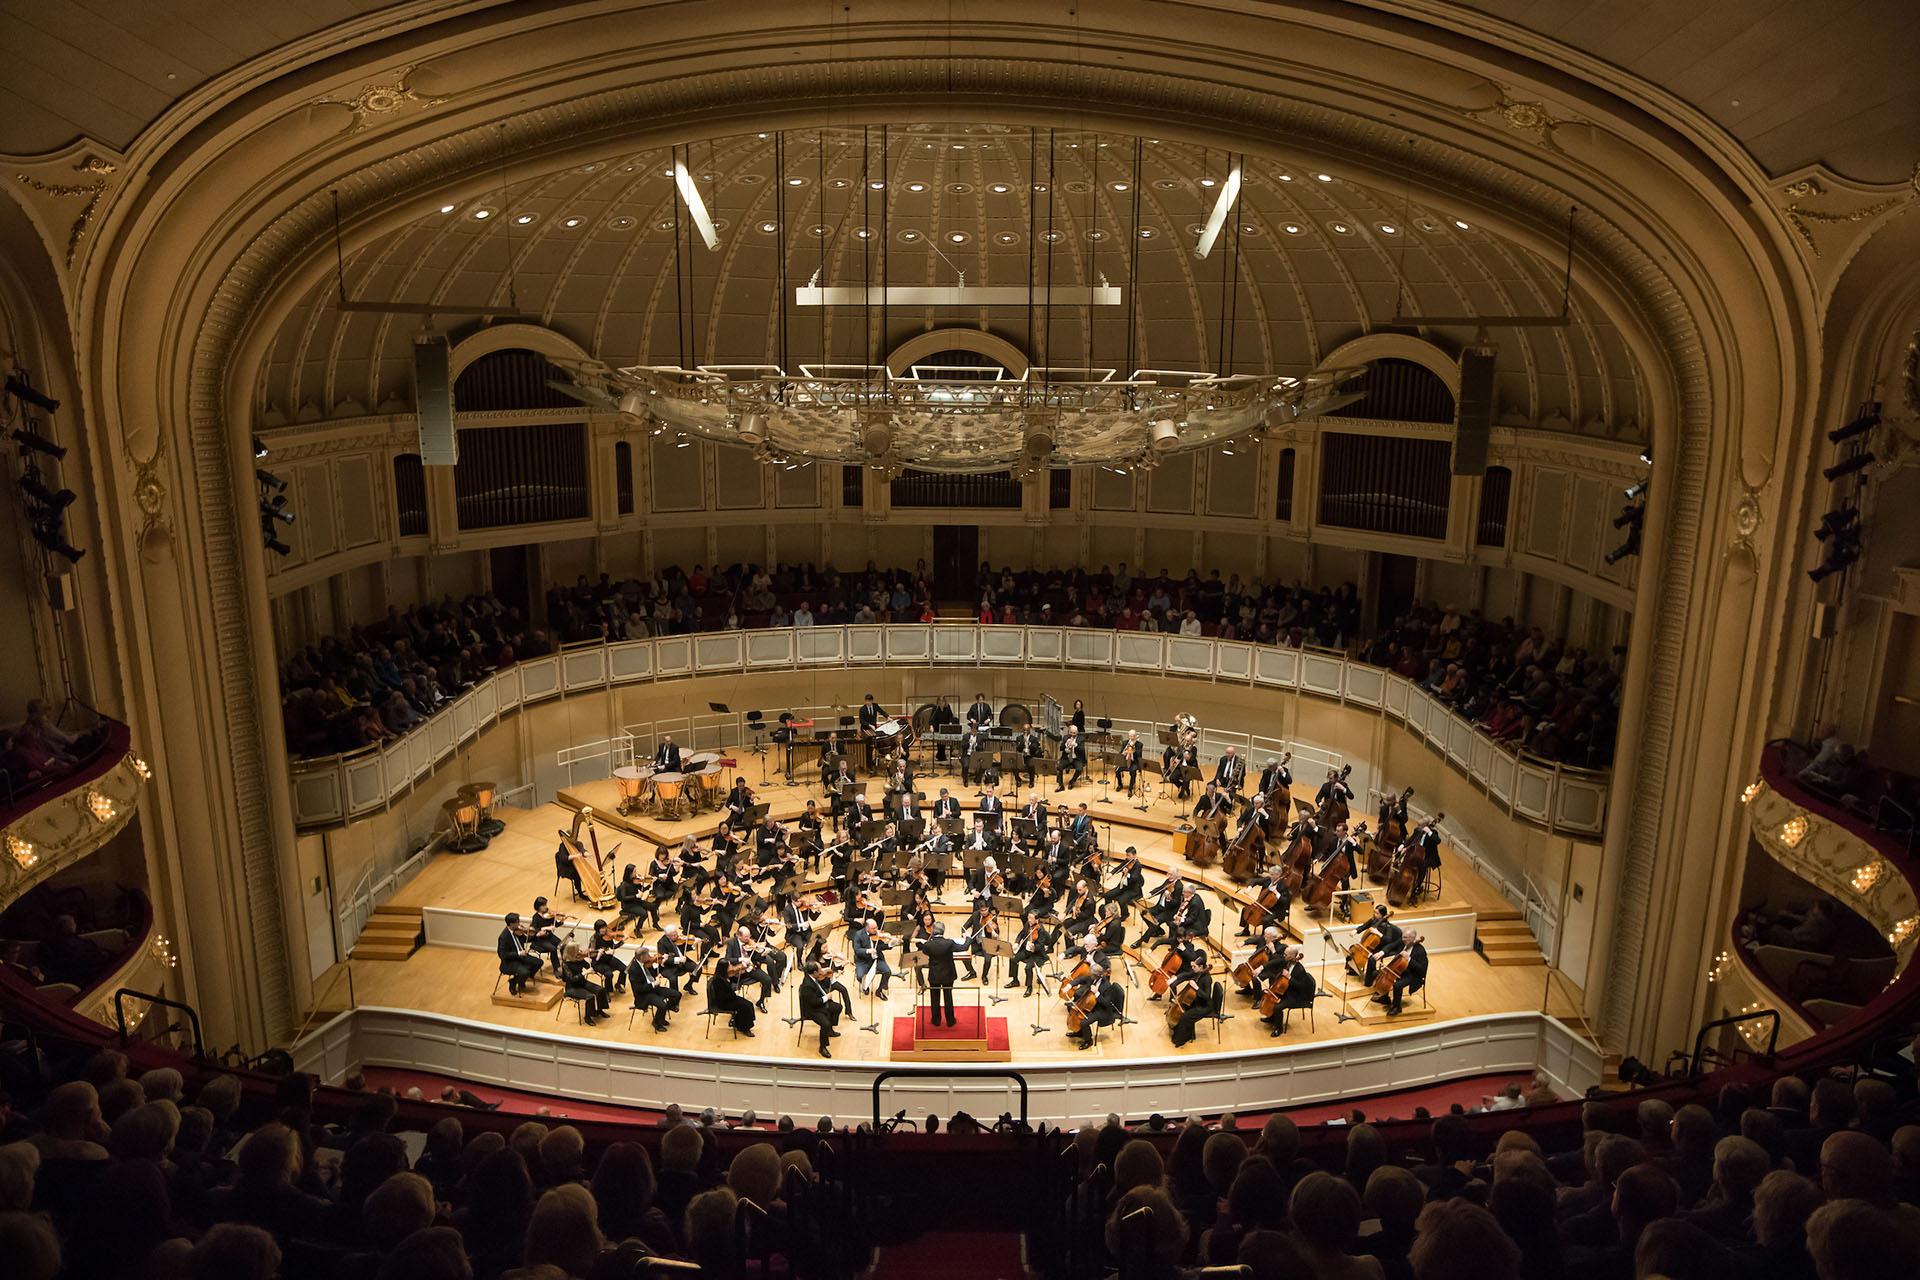 The Chicago Symphony Orchestra conducted by Maestro Riccardo Muti performs “DREAM” by Pulitzer Prize-winning composer Bernard Rands, a world premiere. ©2019 Anne Ryan